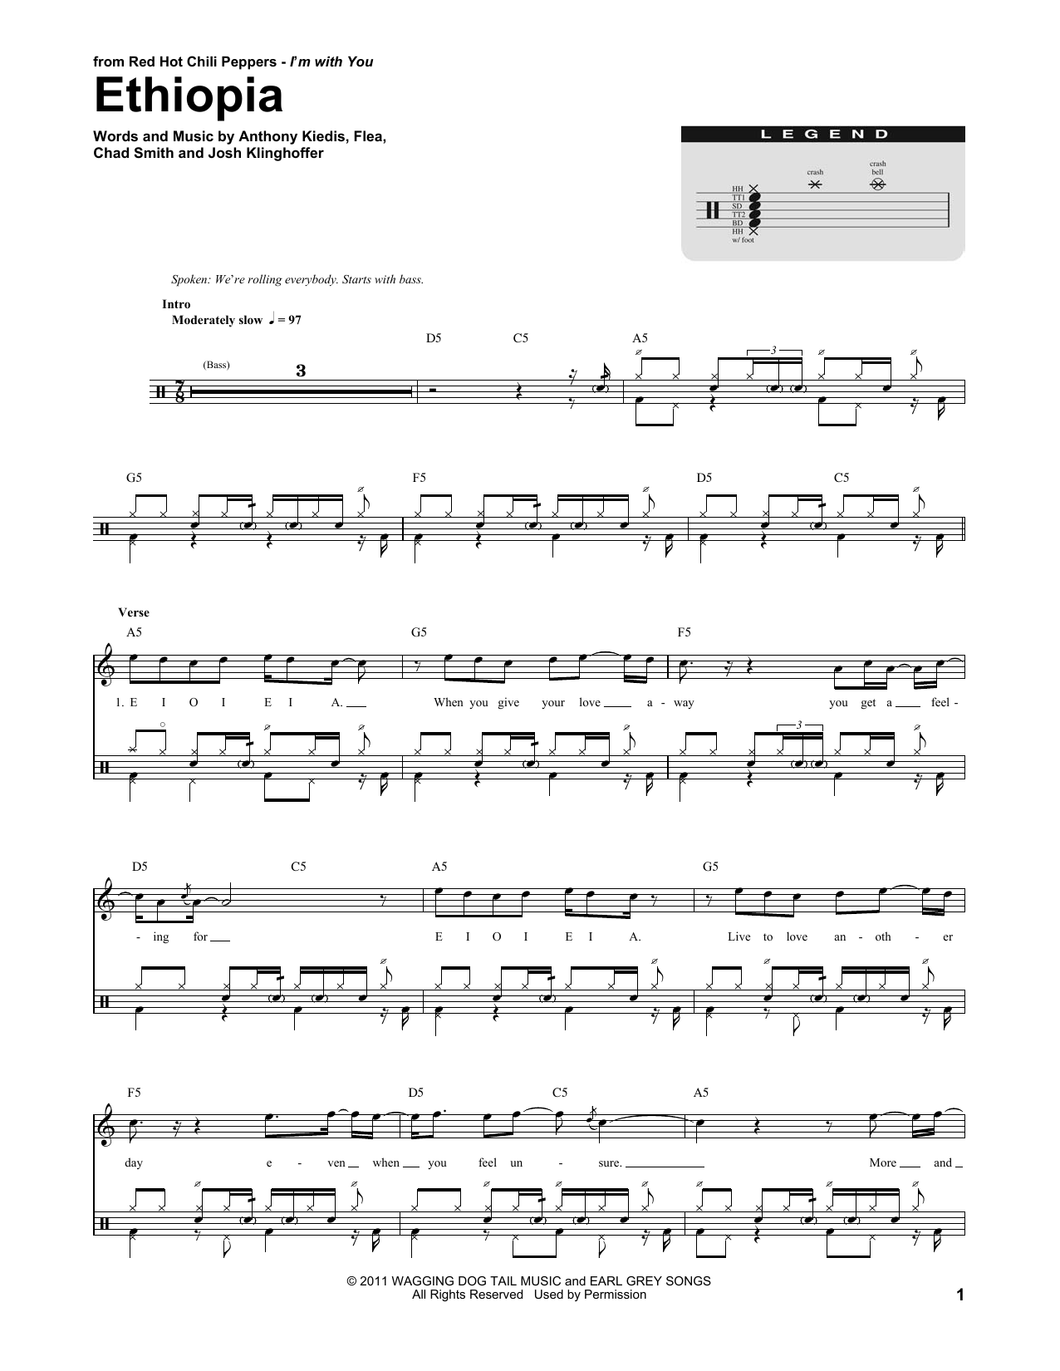 Ethiopia - Red Hot Chili Peppers - Full Drum Transcription / Drum Sheet Music - SheetMusicDirect DT